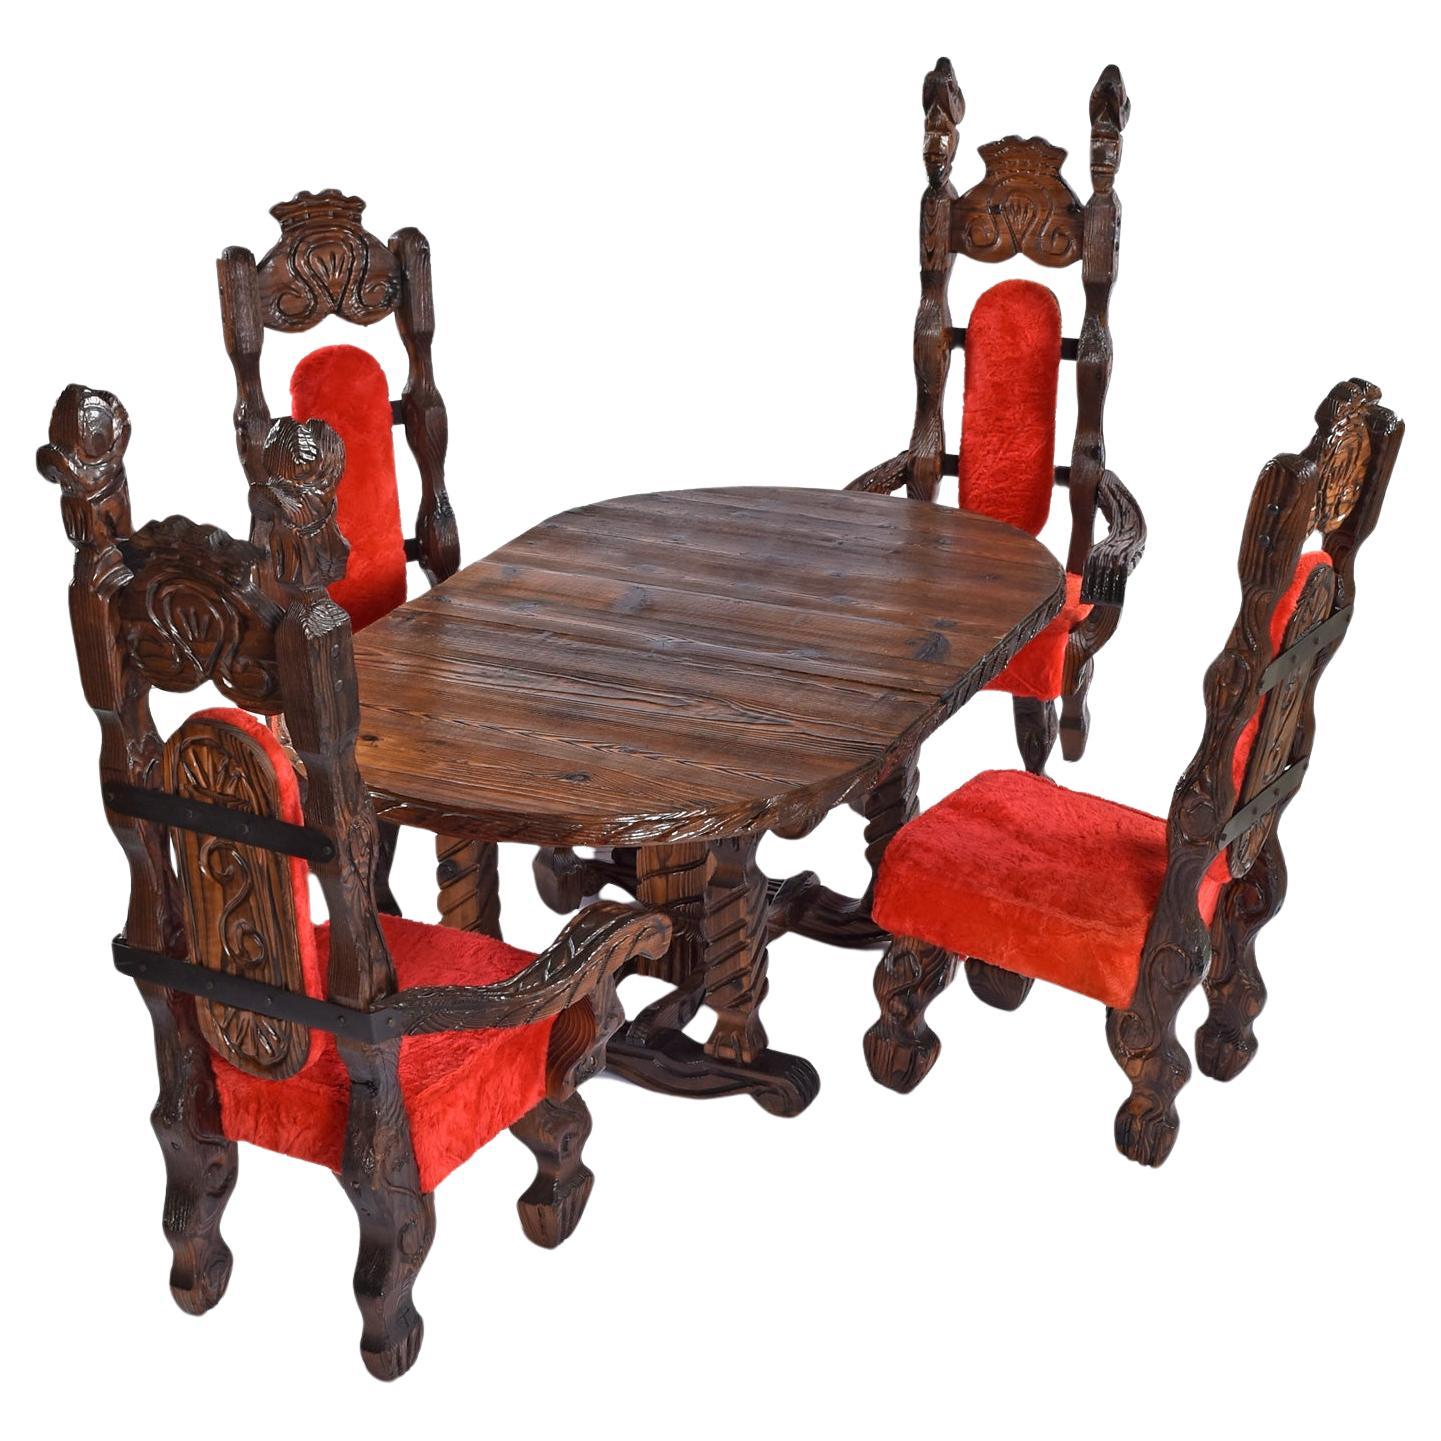 Vintage Witco Rustic Carved Wood Conquistador Dining Set with Red Fur Chairs